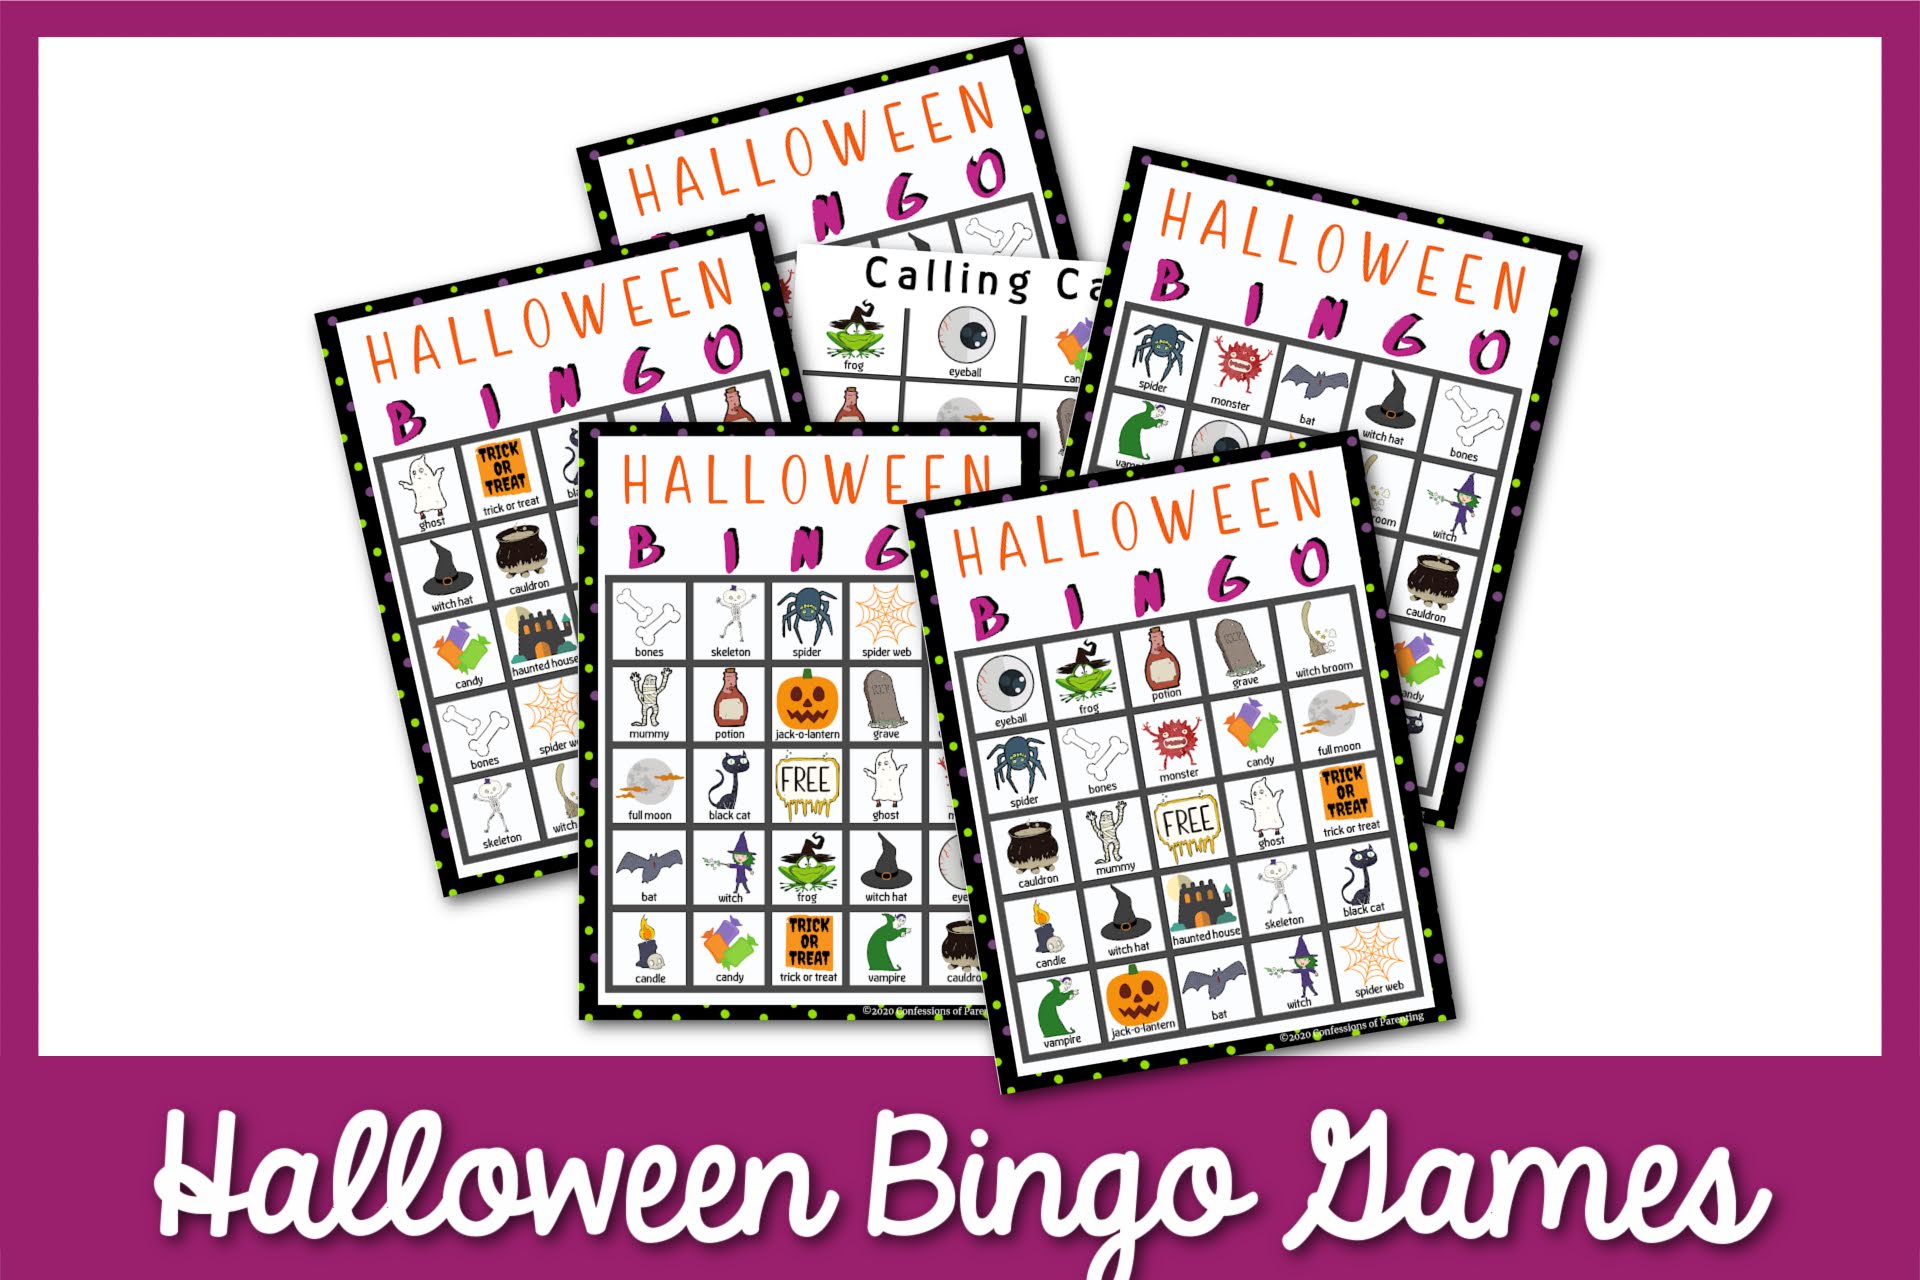 feature image: Halloween Bingo Printable cards on a purple background